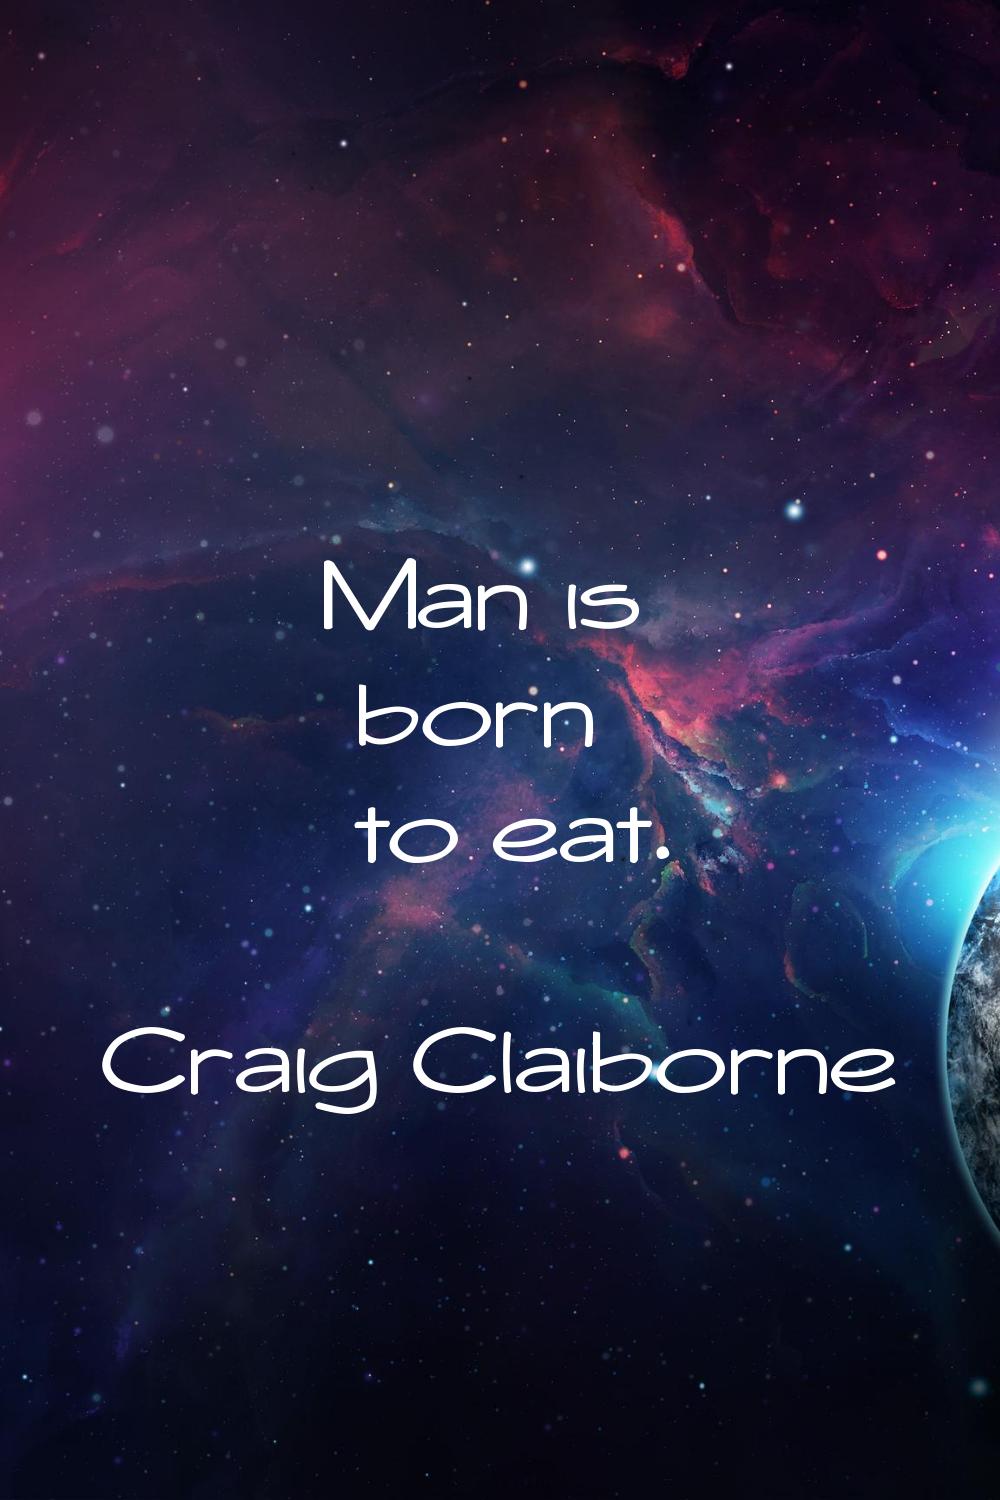 Man is born to eat.